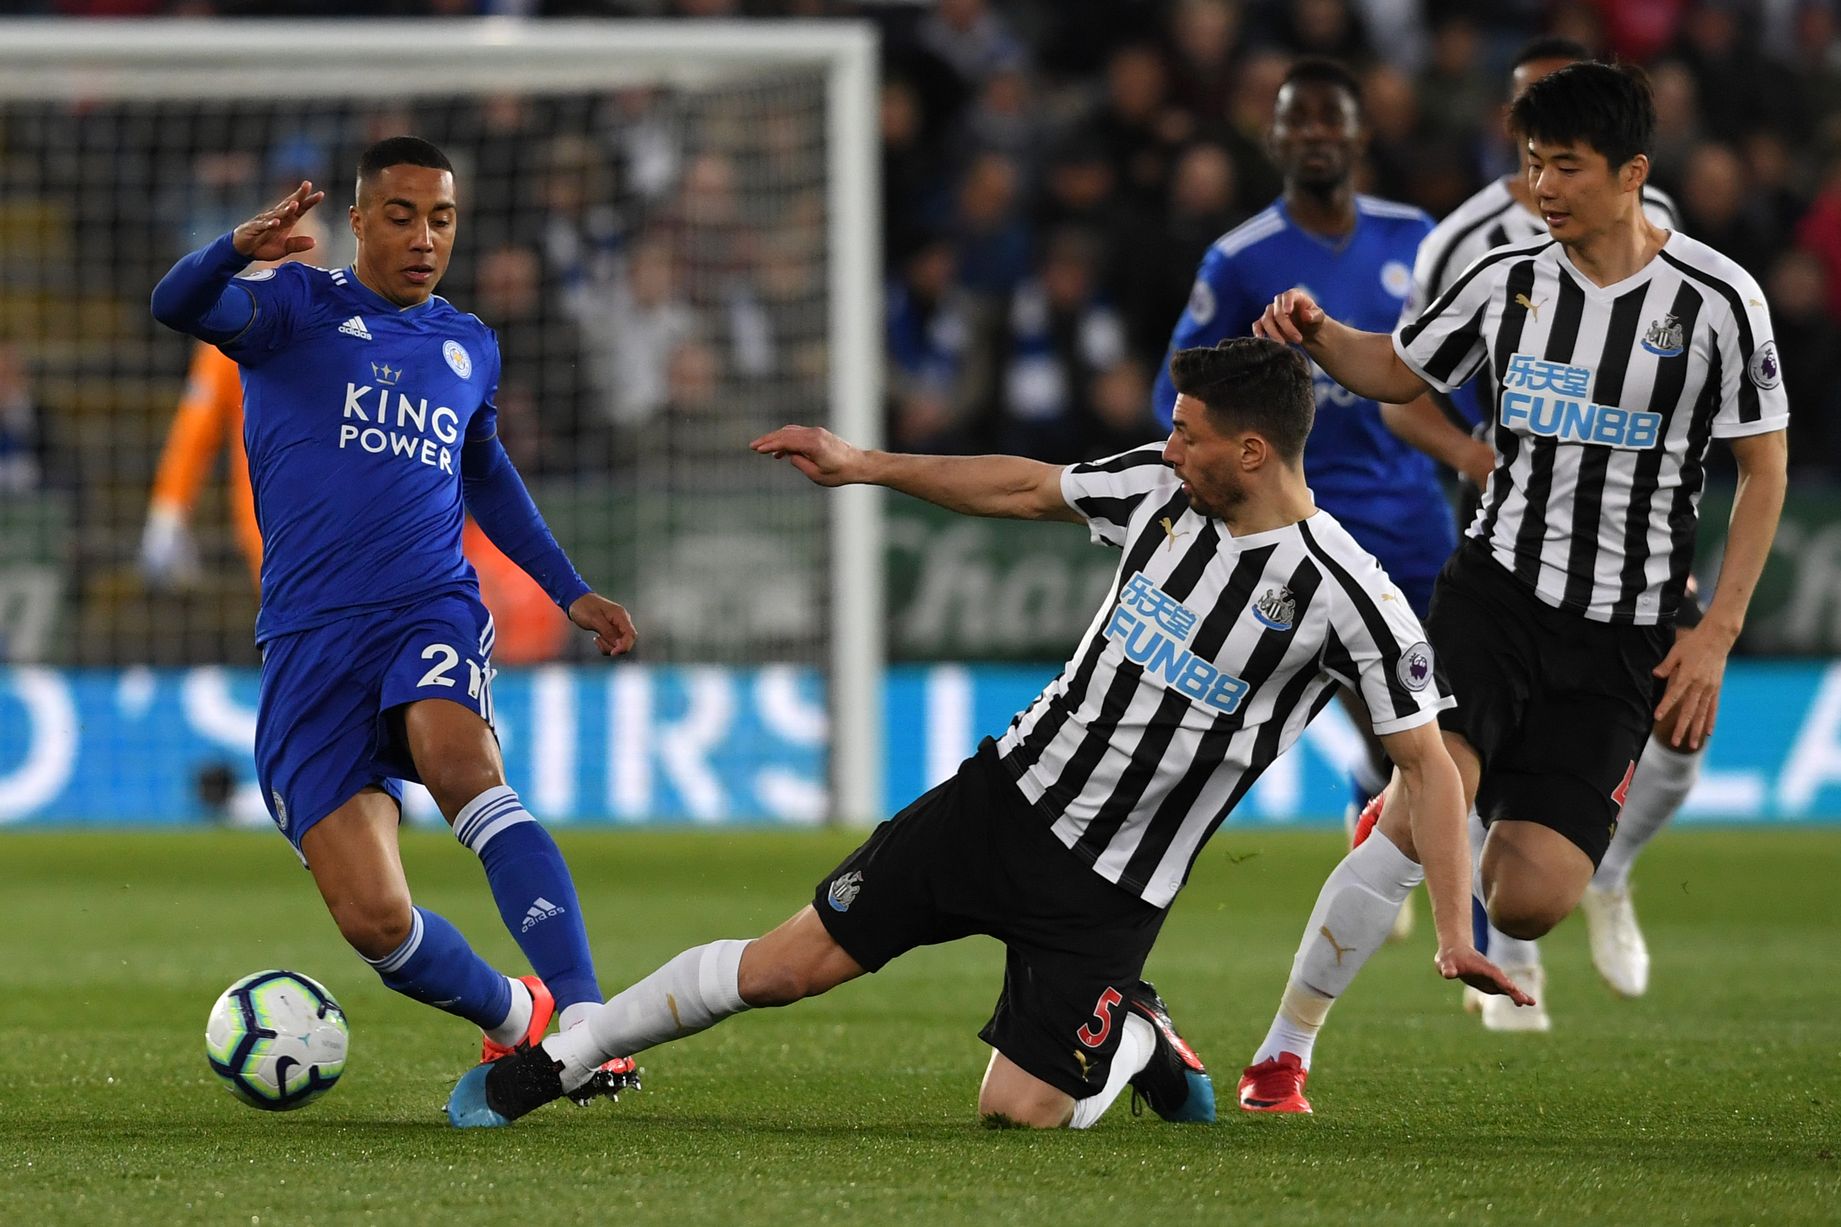 soi-keo-newcastle-vs-leicester-21h15-ngay-3-1-2021-2